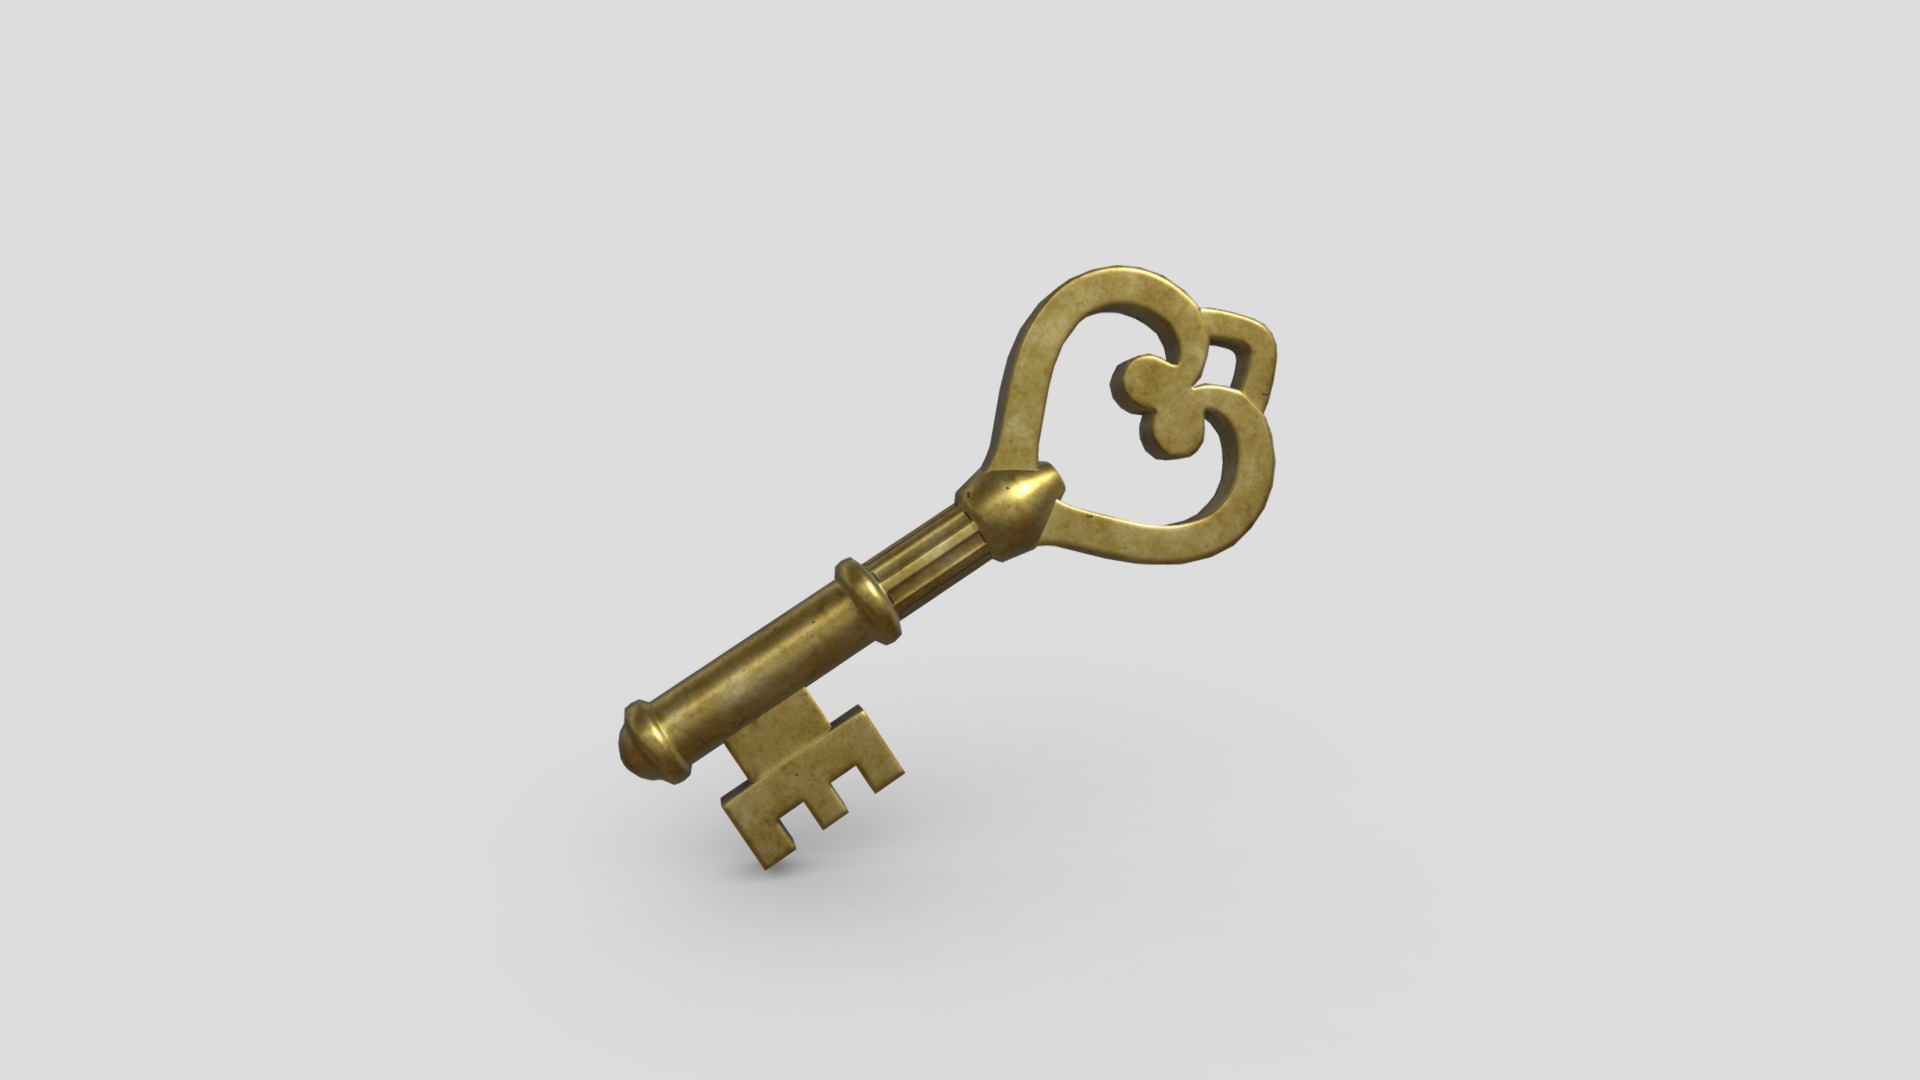 3D model Key 2 - This is a 3D model of the Key 2. The 3D model is about a gold key with a silver handle.